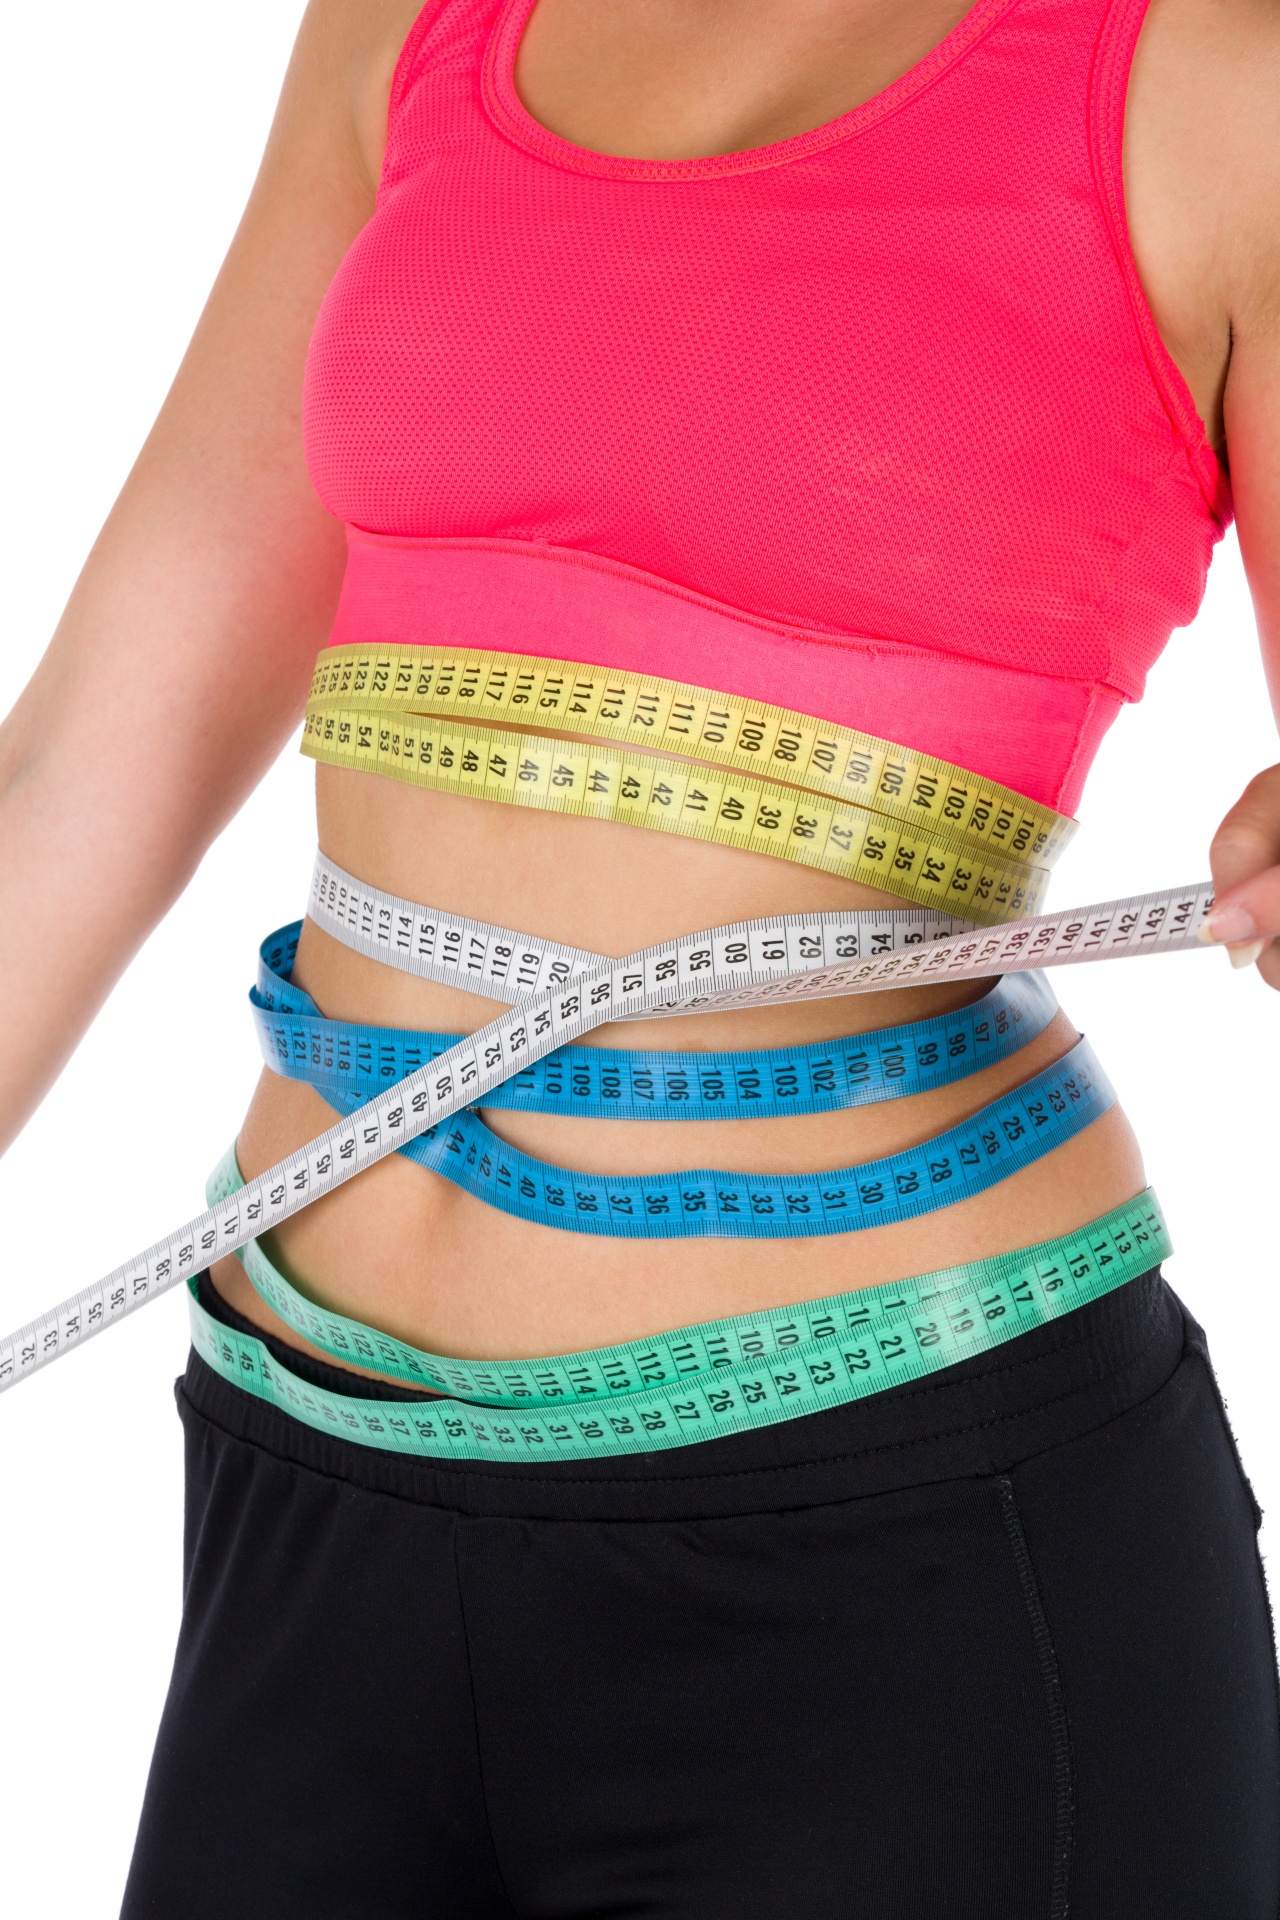 Fit Belly And Tape Measures